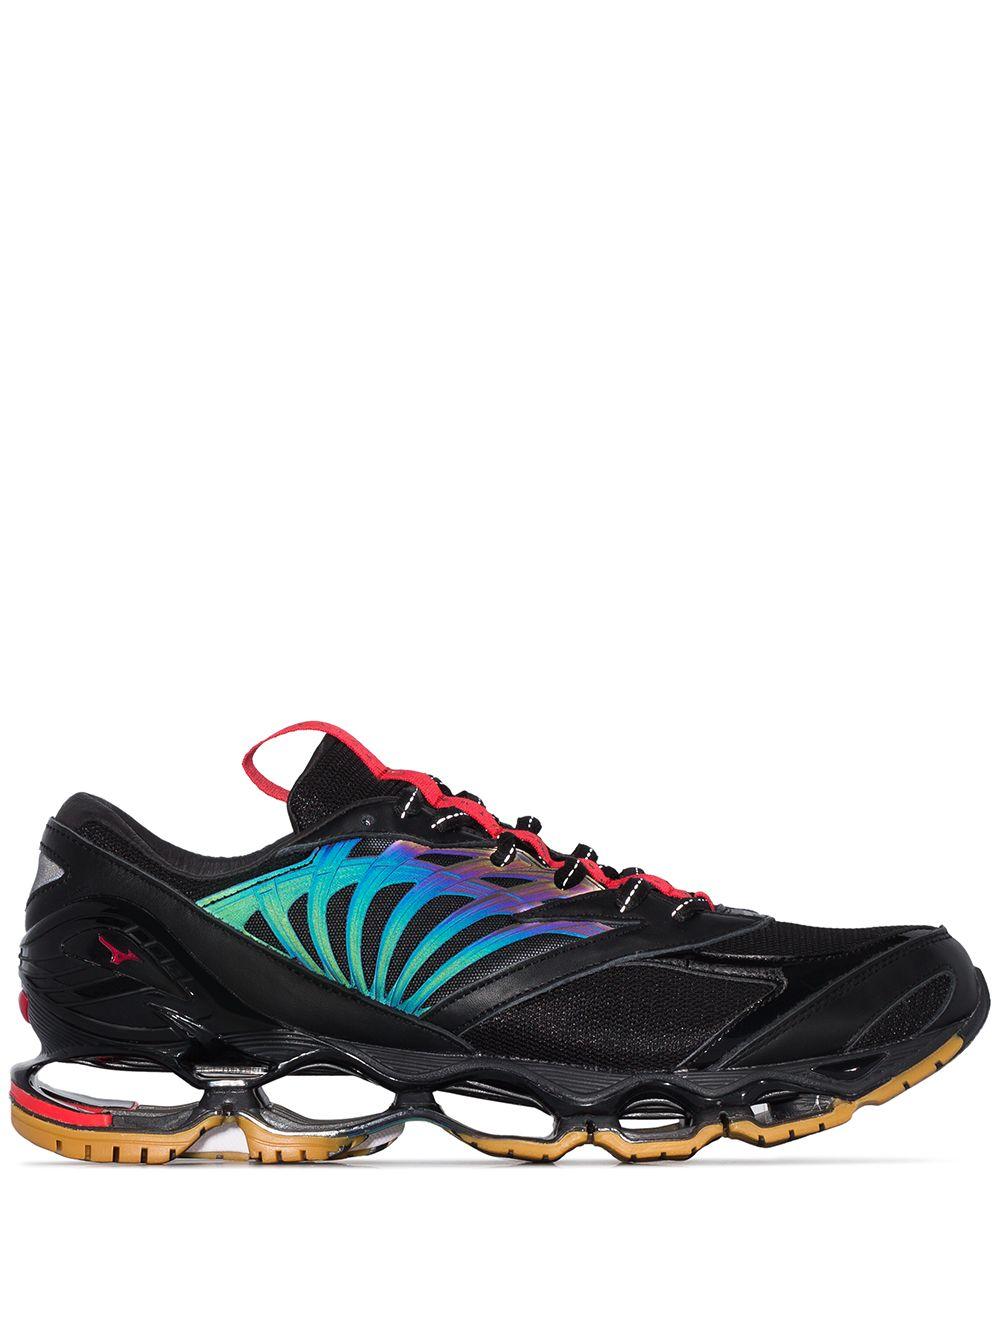 Mizuno Synthetic X Futur Wave Prophecy Sneakers in Black for Men - Lyst